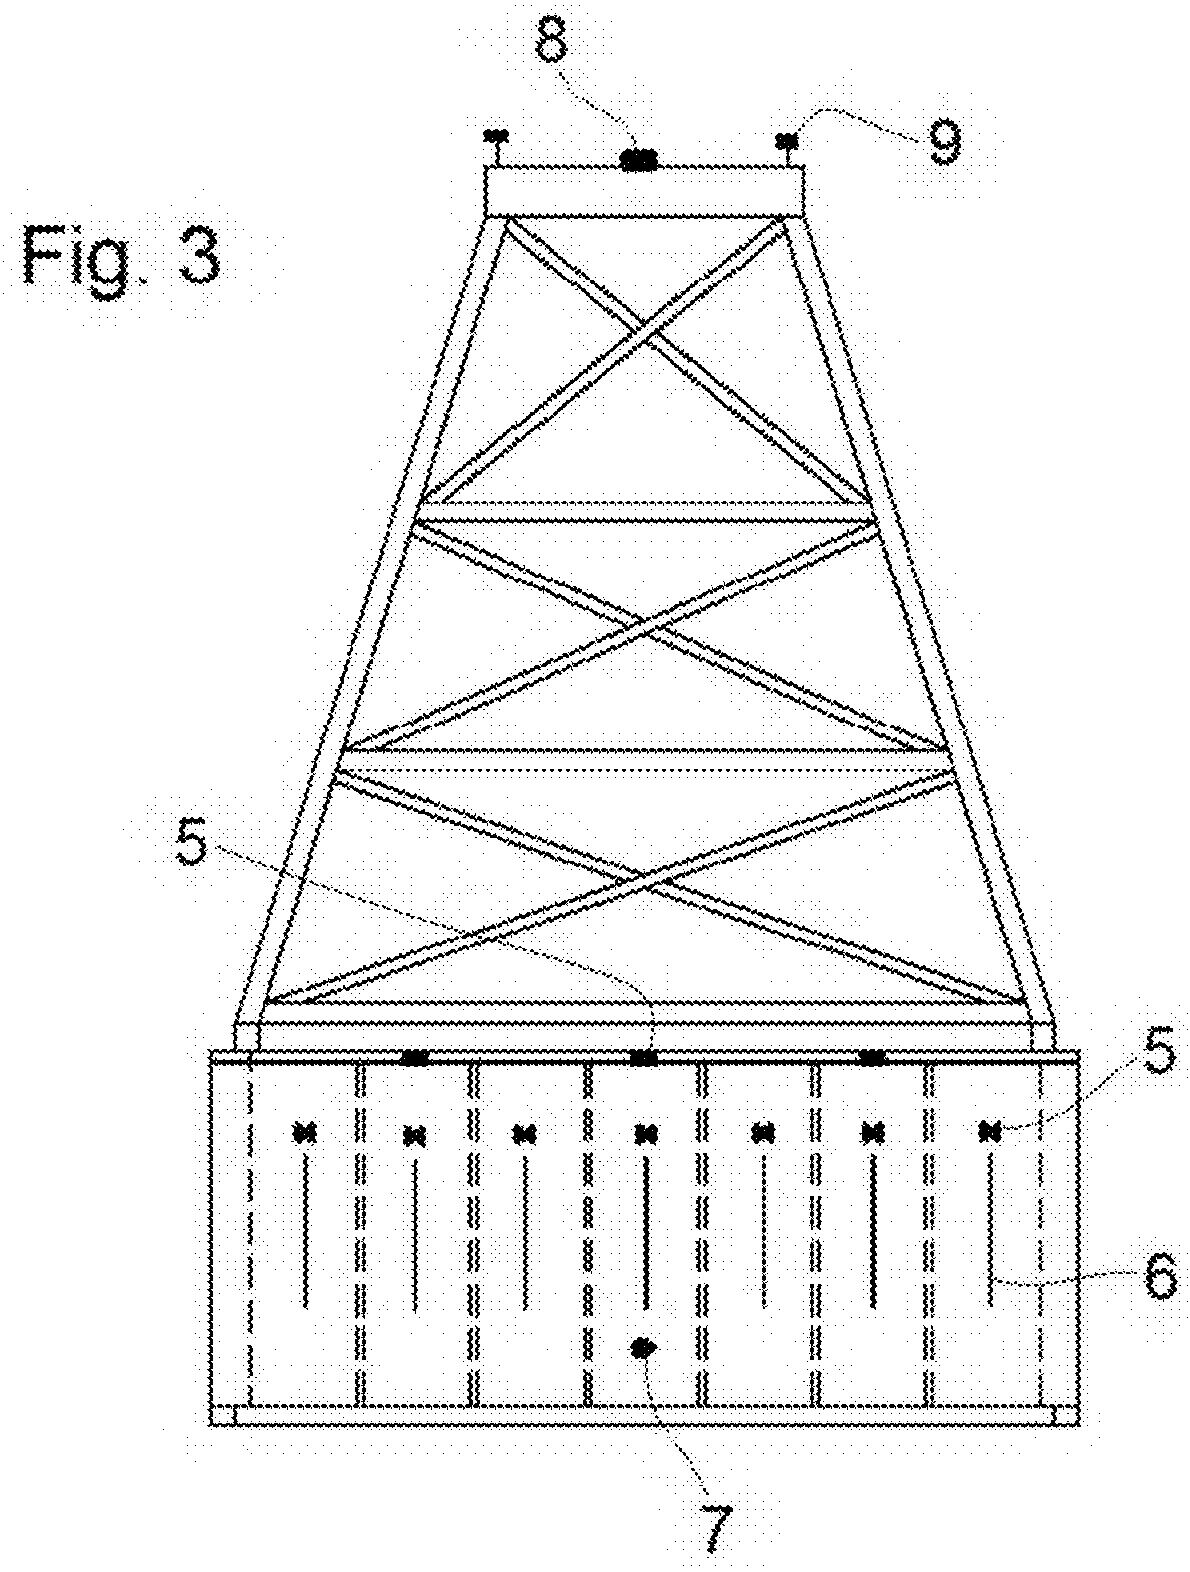 Autonomous anchoring method and system for foundations of offshore structures